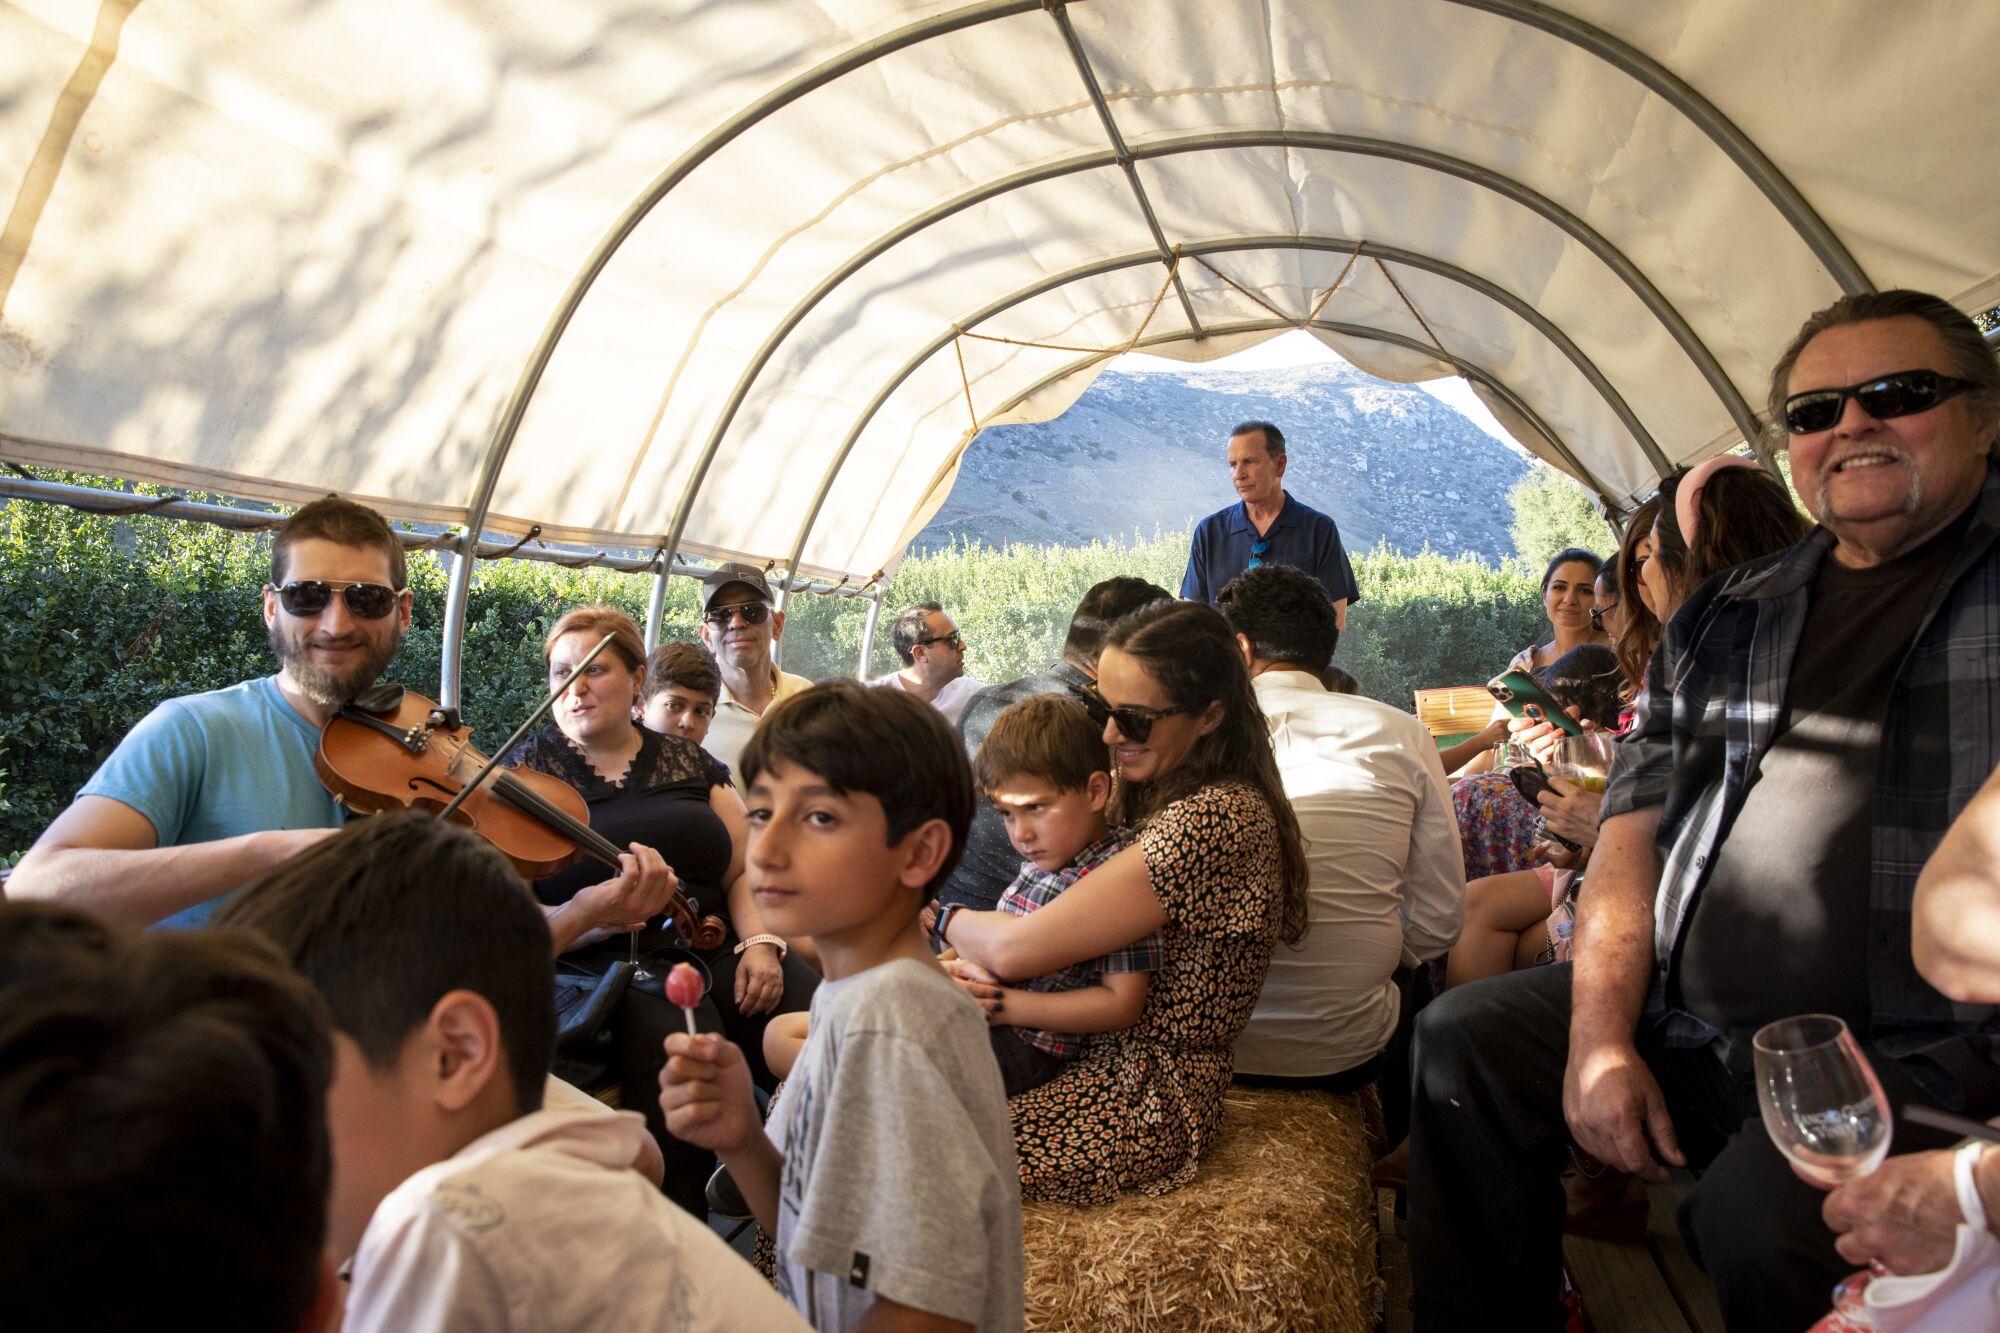 Friends and families listen to music during a hayride at the Rancho Guejito Vineyard in the San Pasqual Valley.